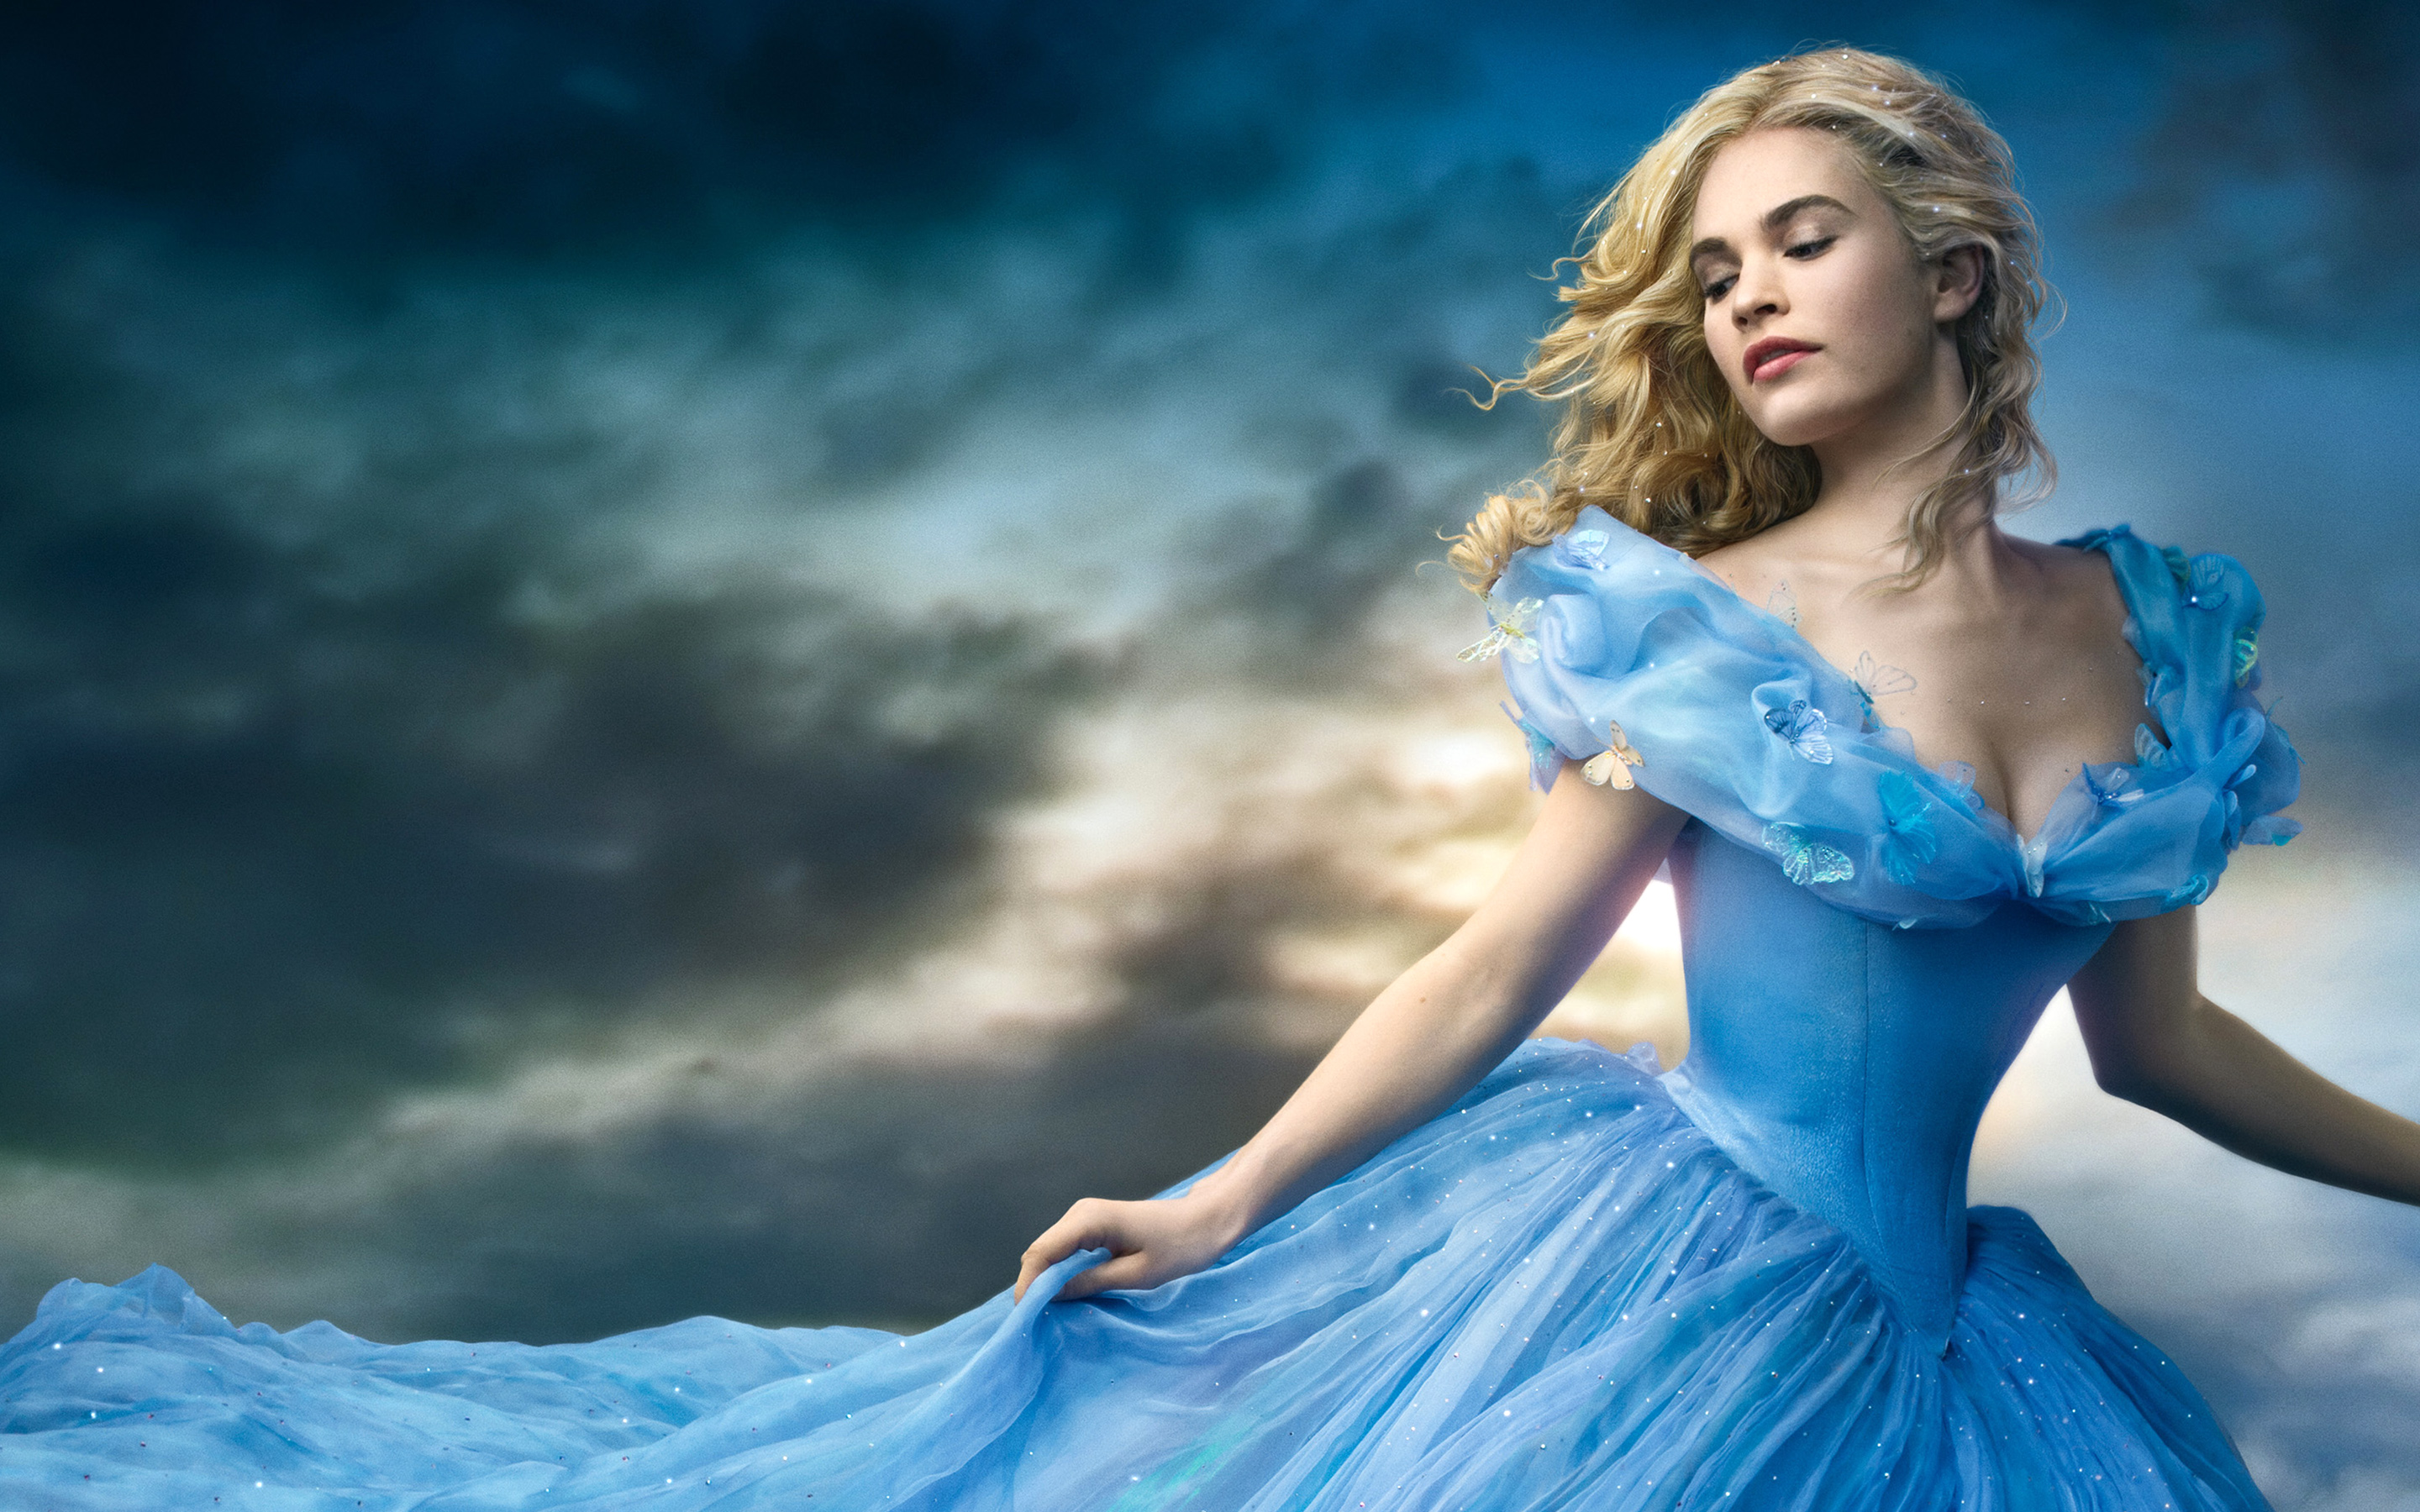 Disney’s Live Action ‘Cinderella’ Now Available on Blu-ray, DVD & Digital Release